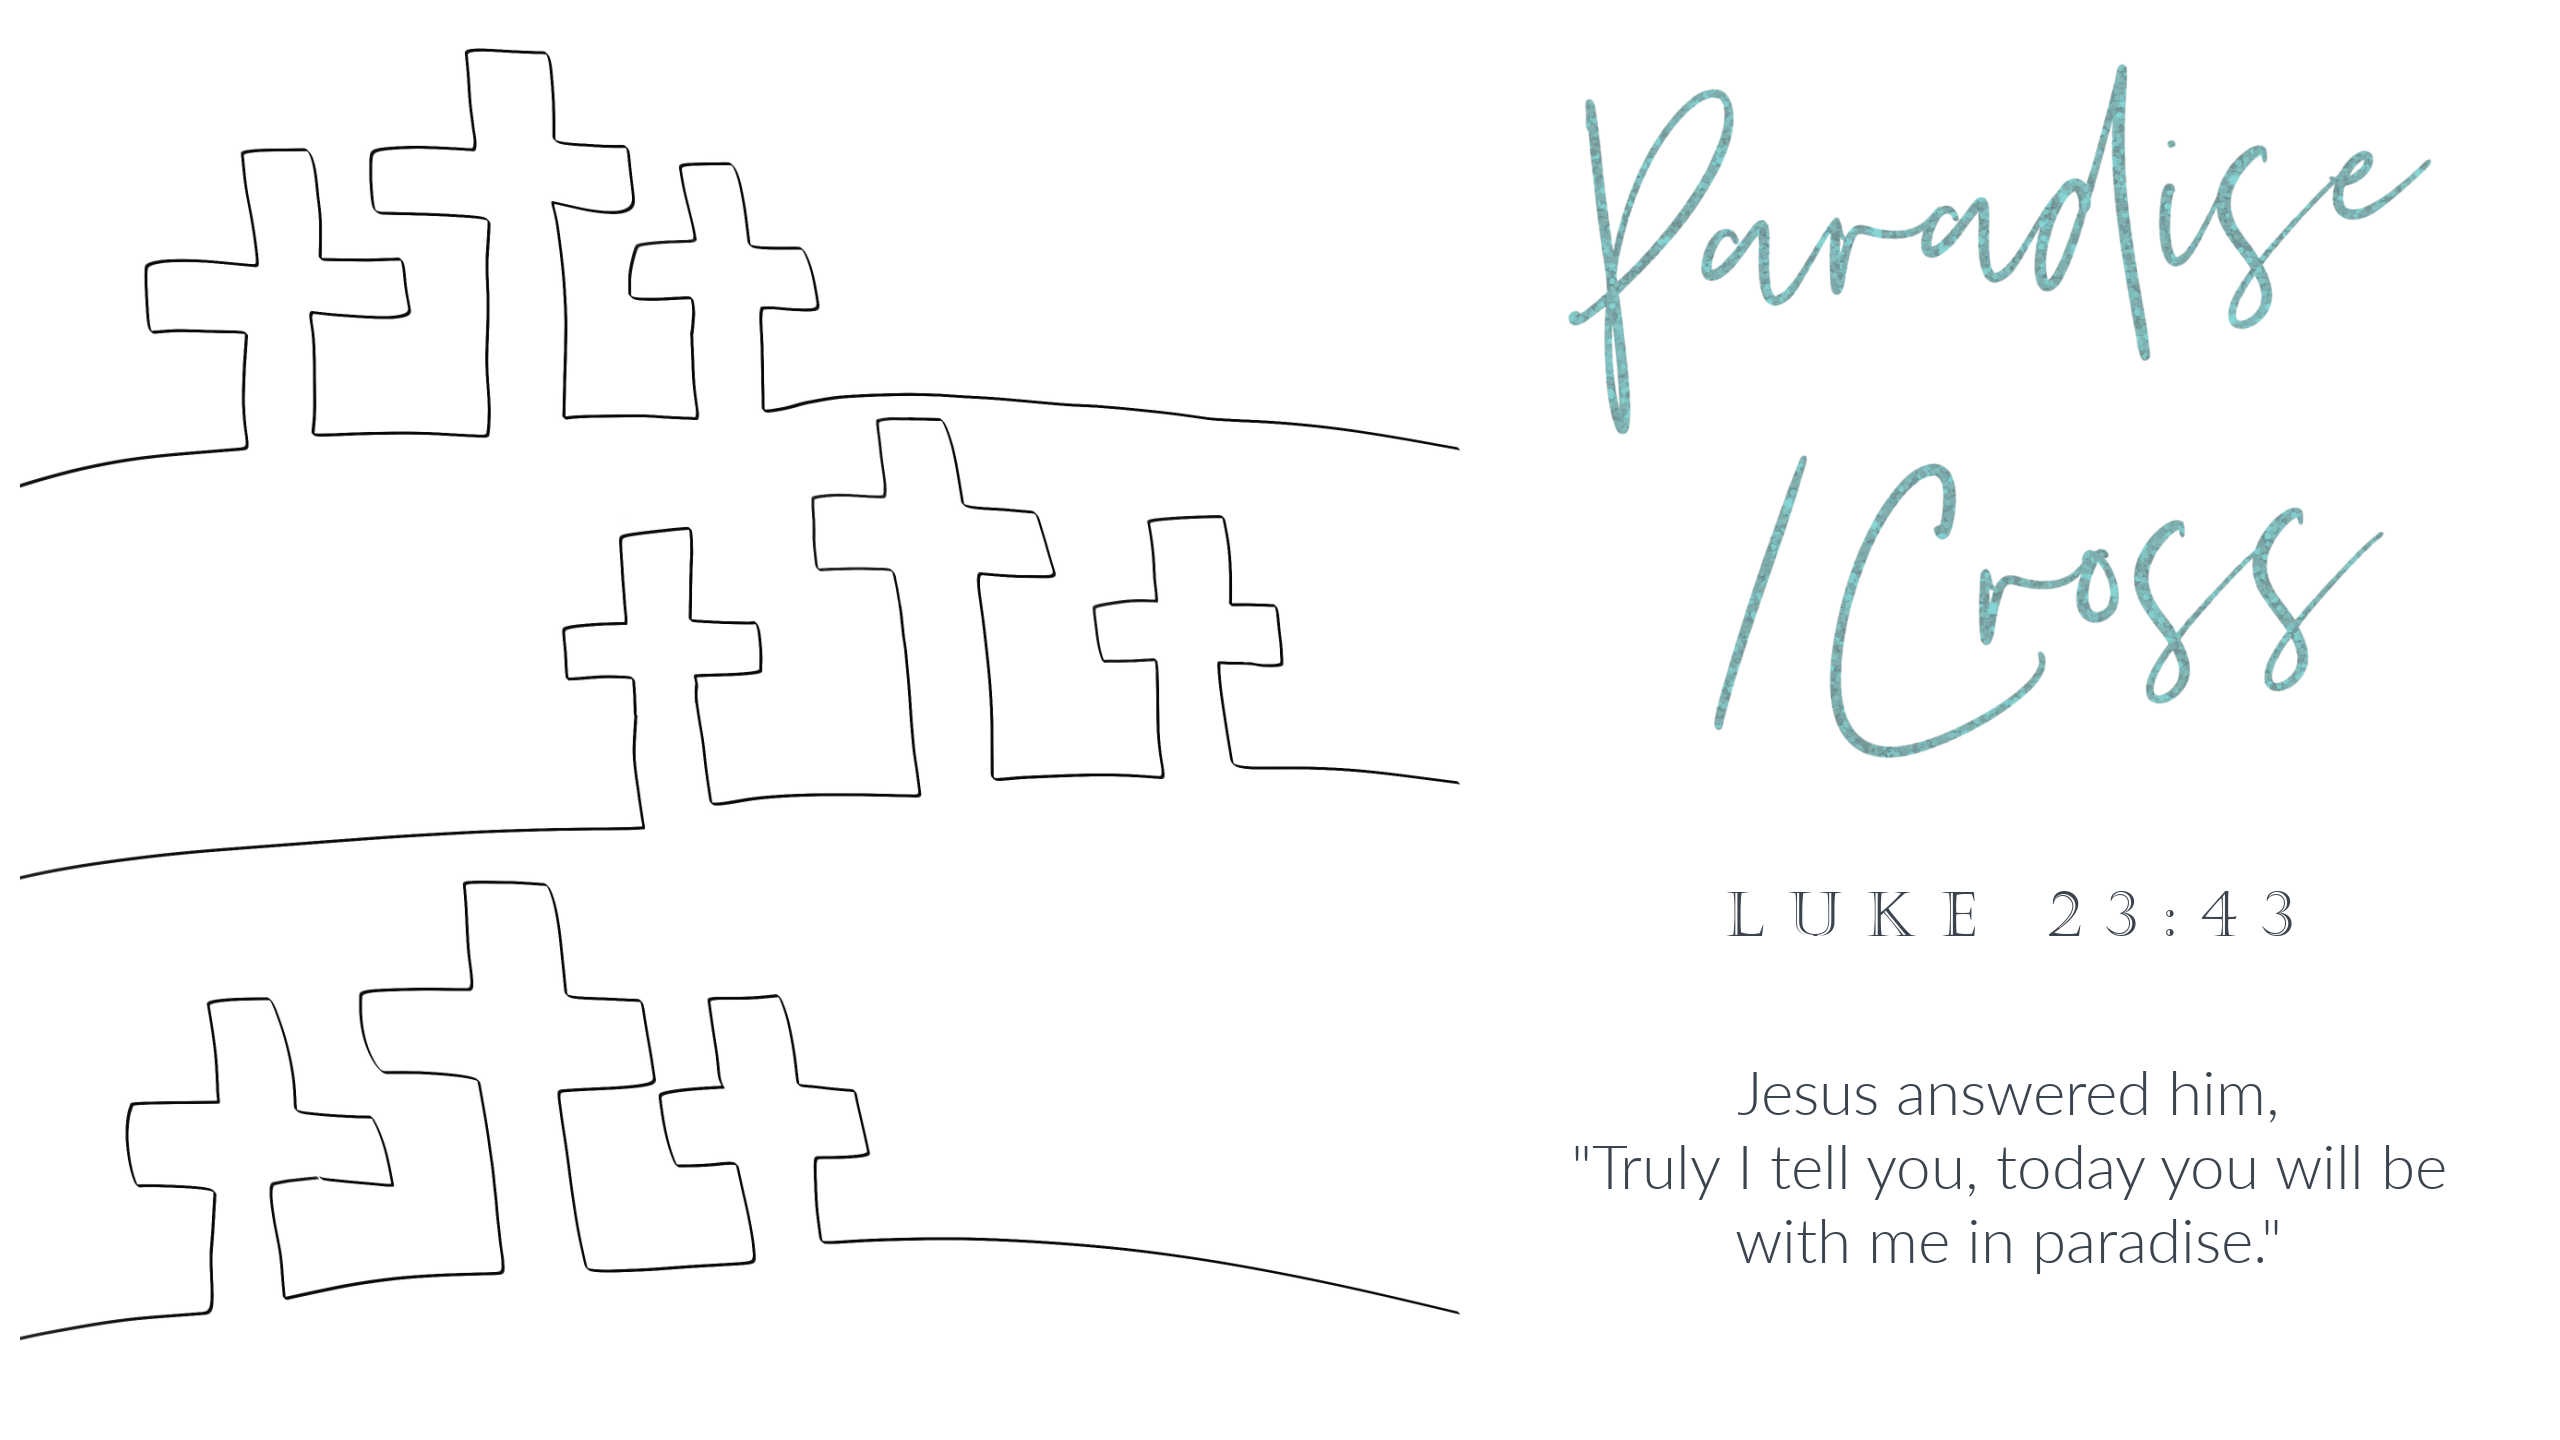 Create a free motion quilt design of the most iconic Christian image: the cross. This basic three cross free motion quilt design would be beautiful in wide quilt borders in a contrasting thread!